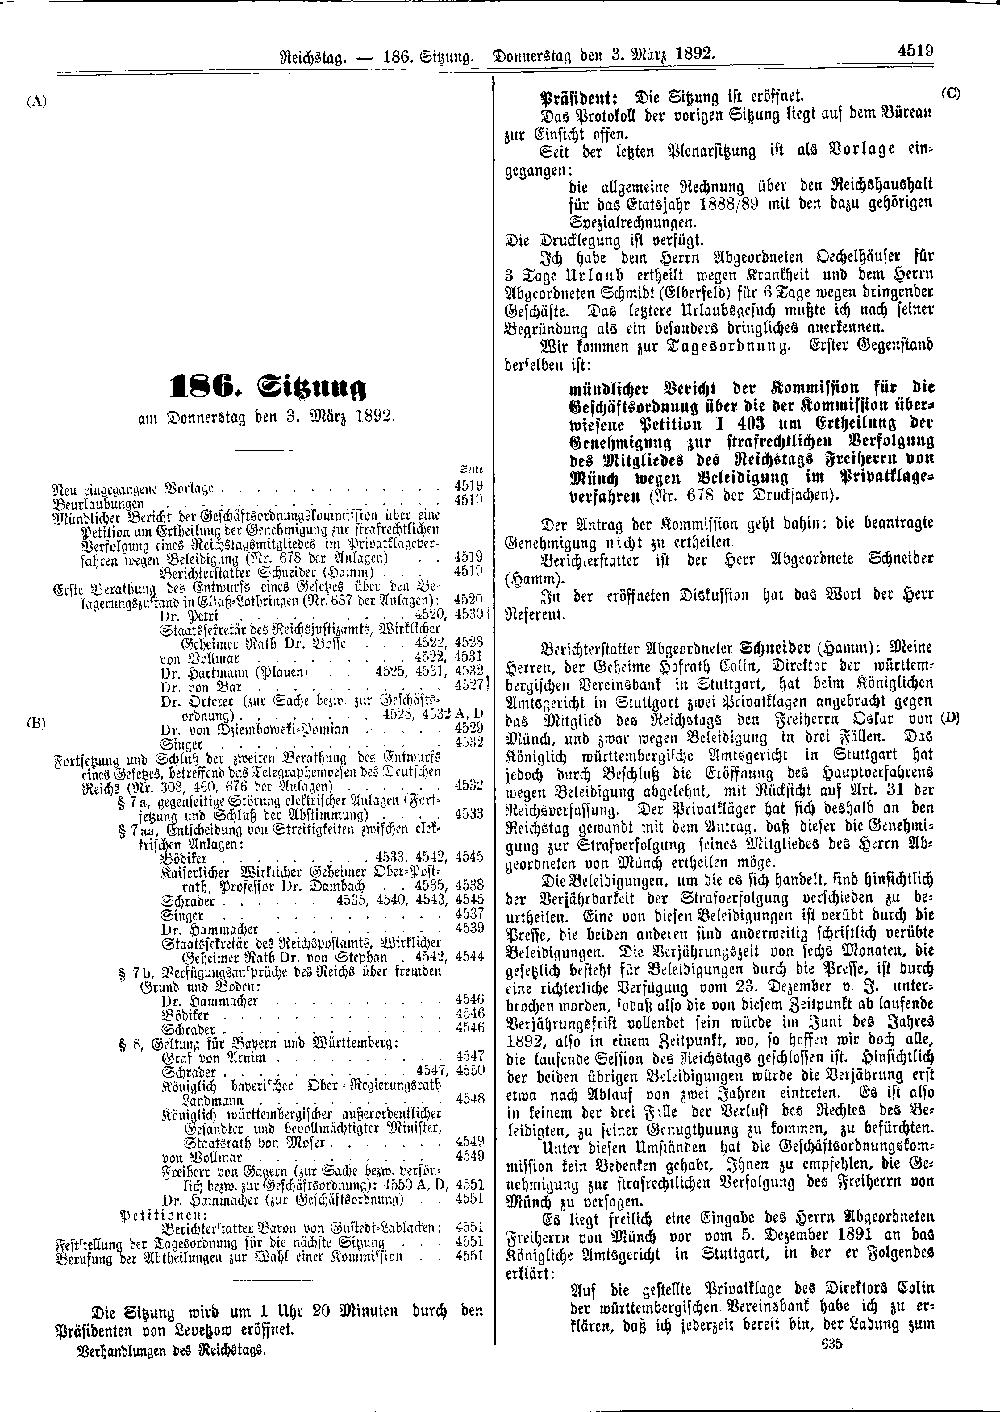 Scan of page 4519